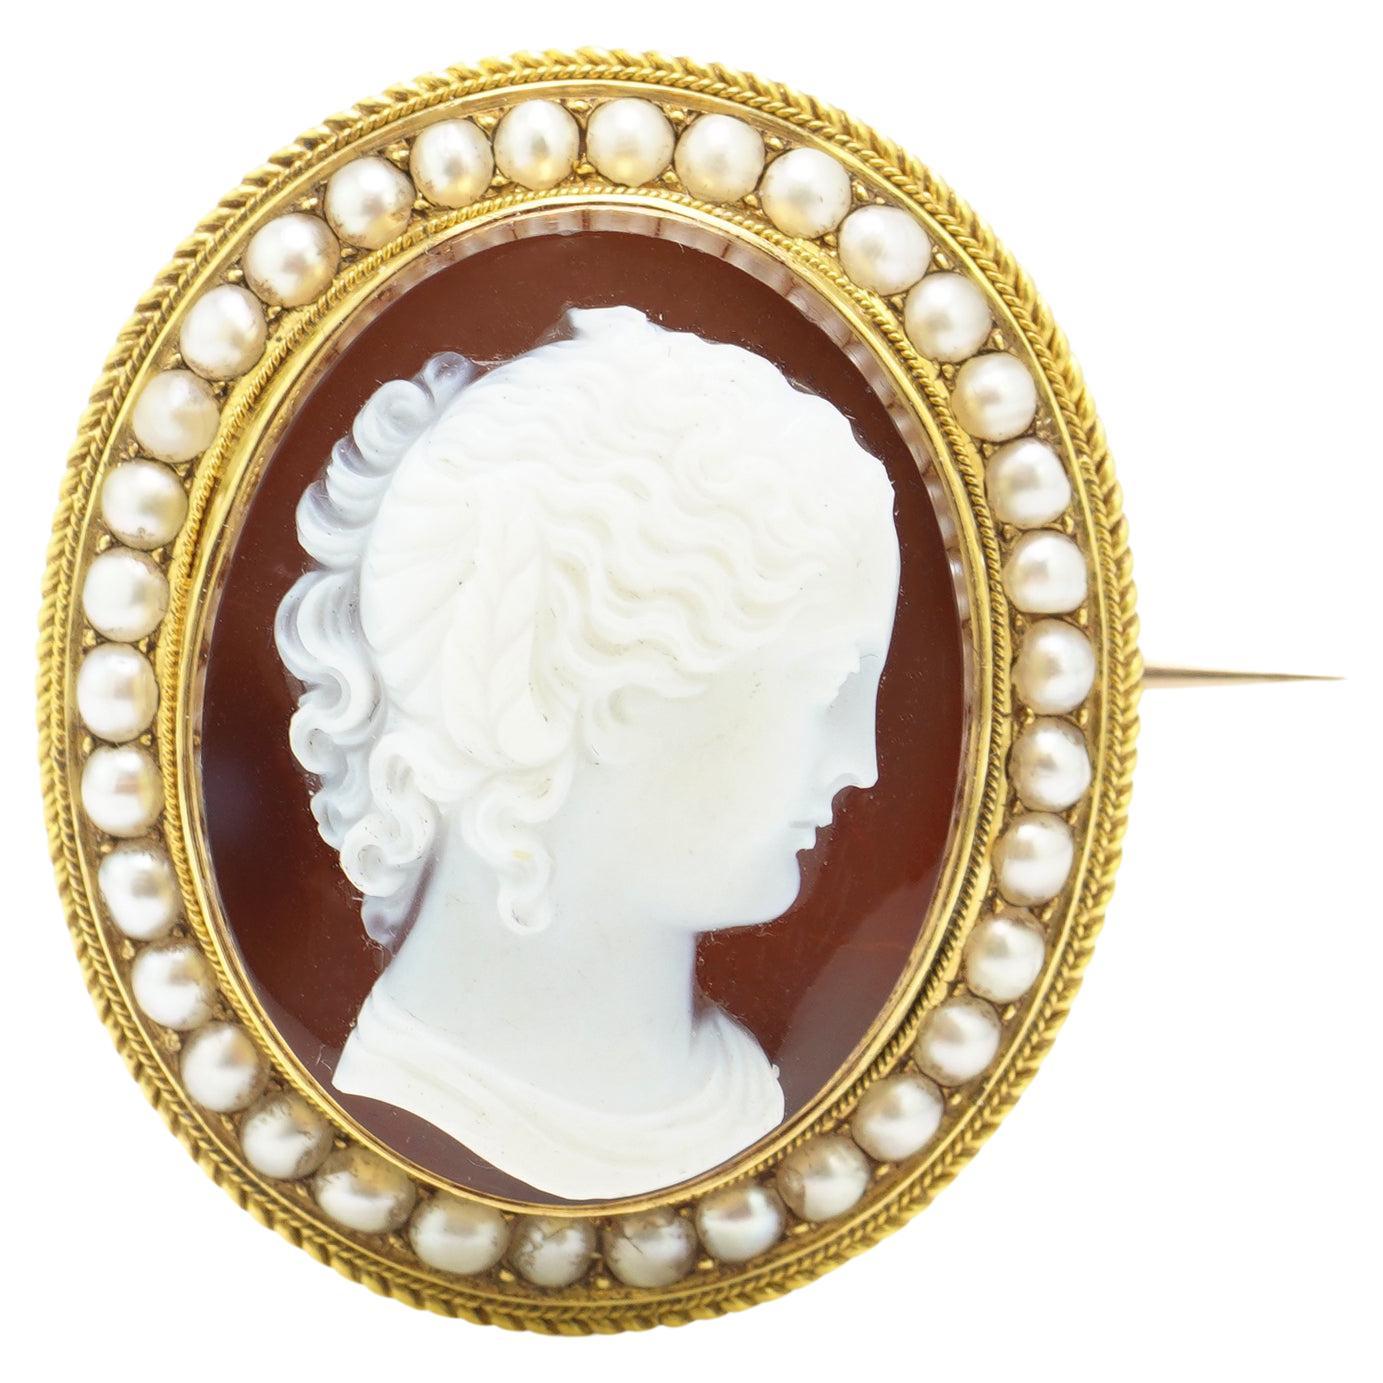 Antique Victorian 15kt Gold Cameo Mourning Brooch